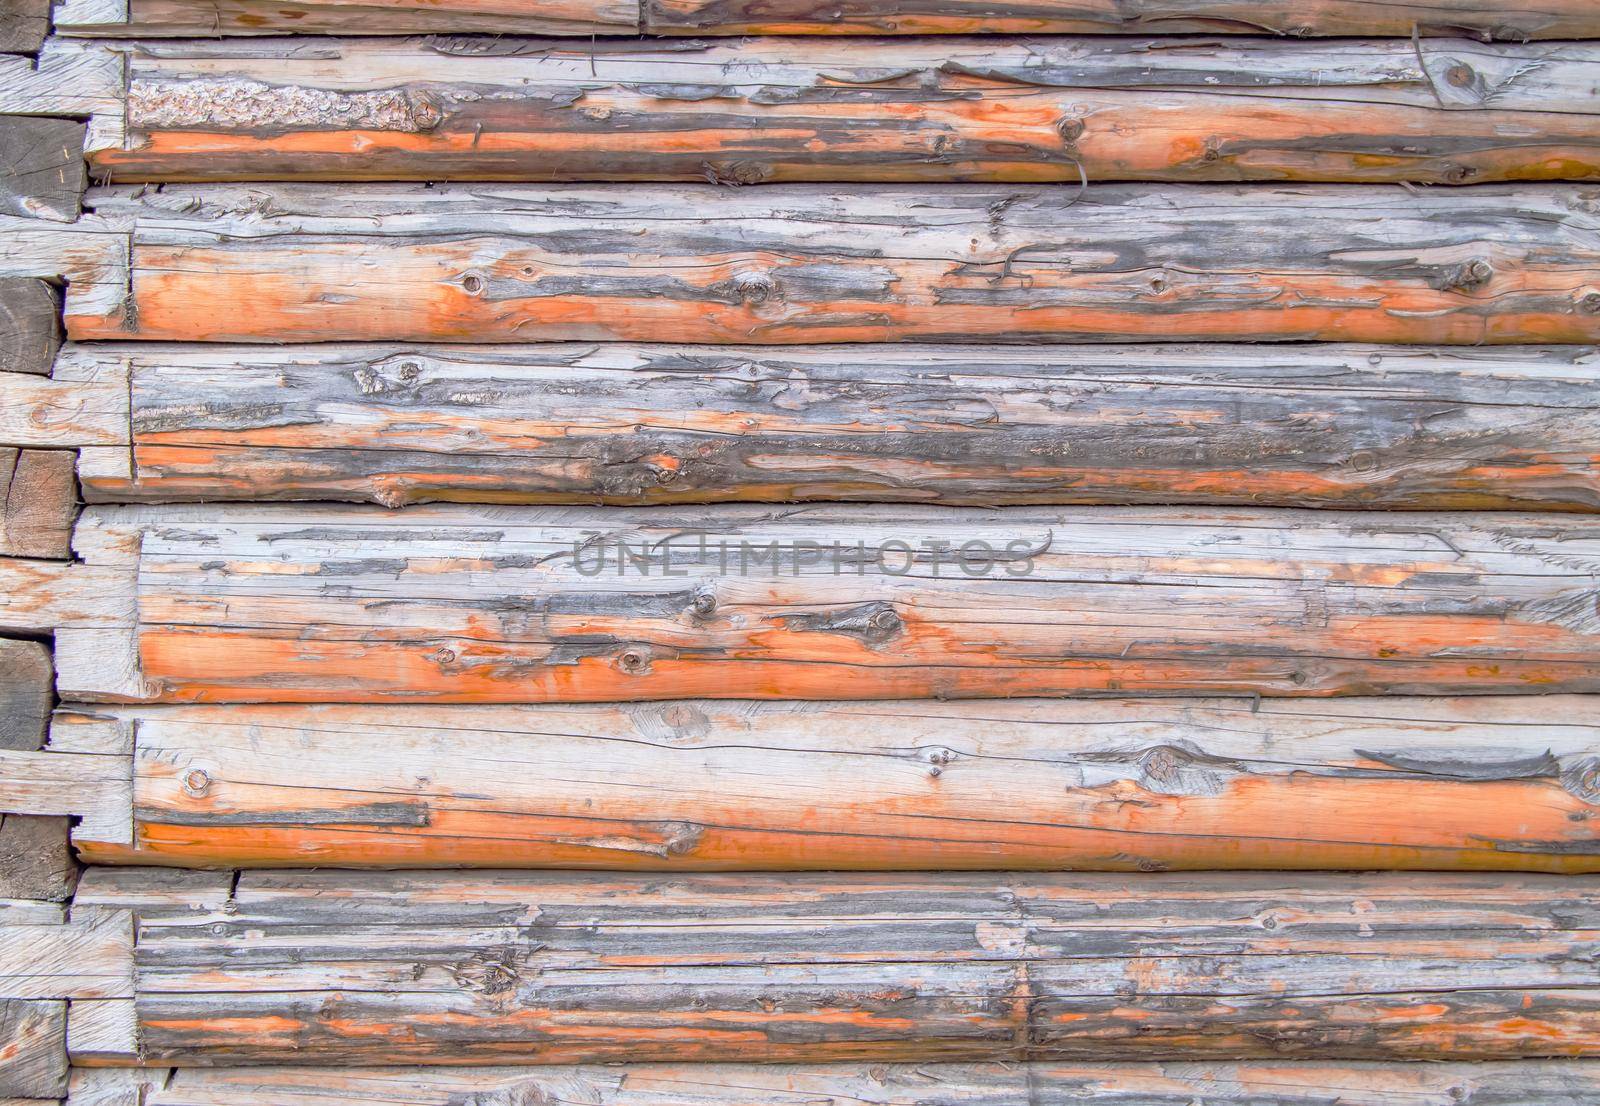 Horizontal natural log background, rough planed wood, rustic log eco-friendly wall by claire_lucia